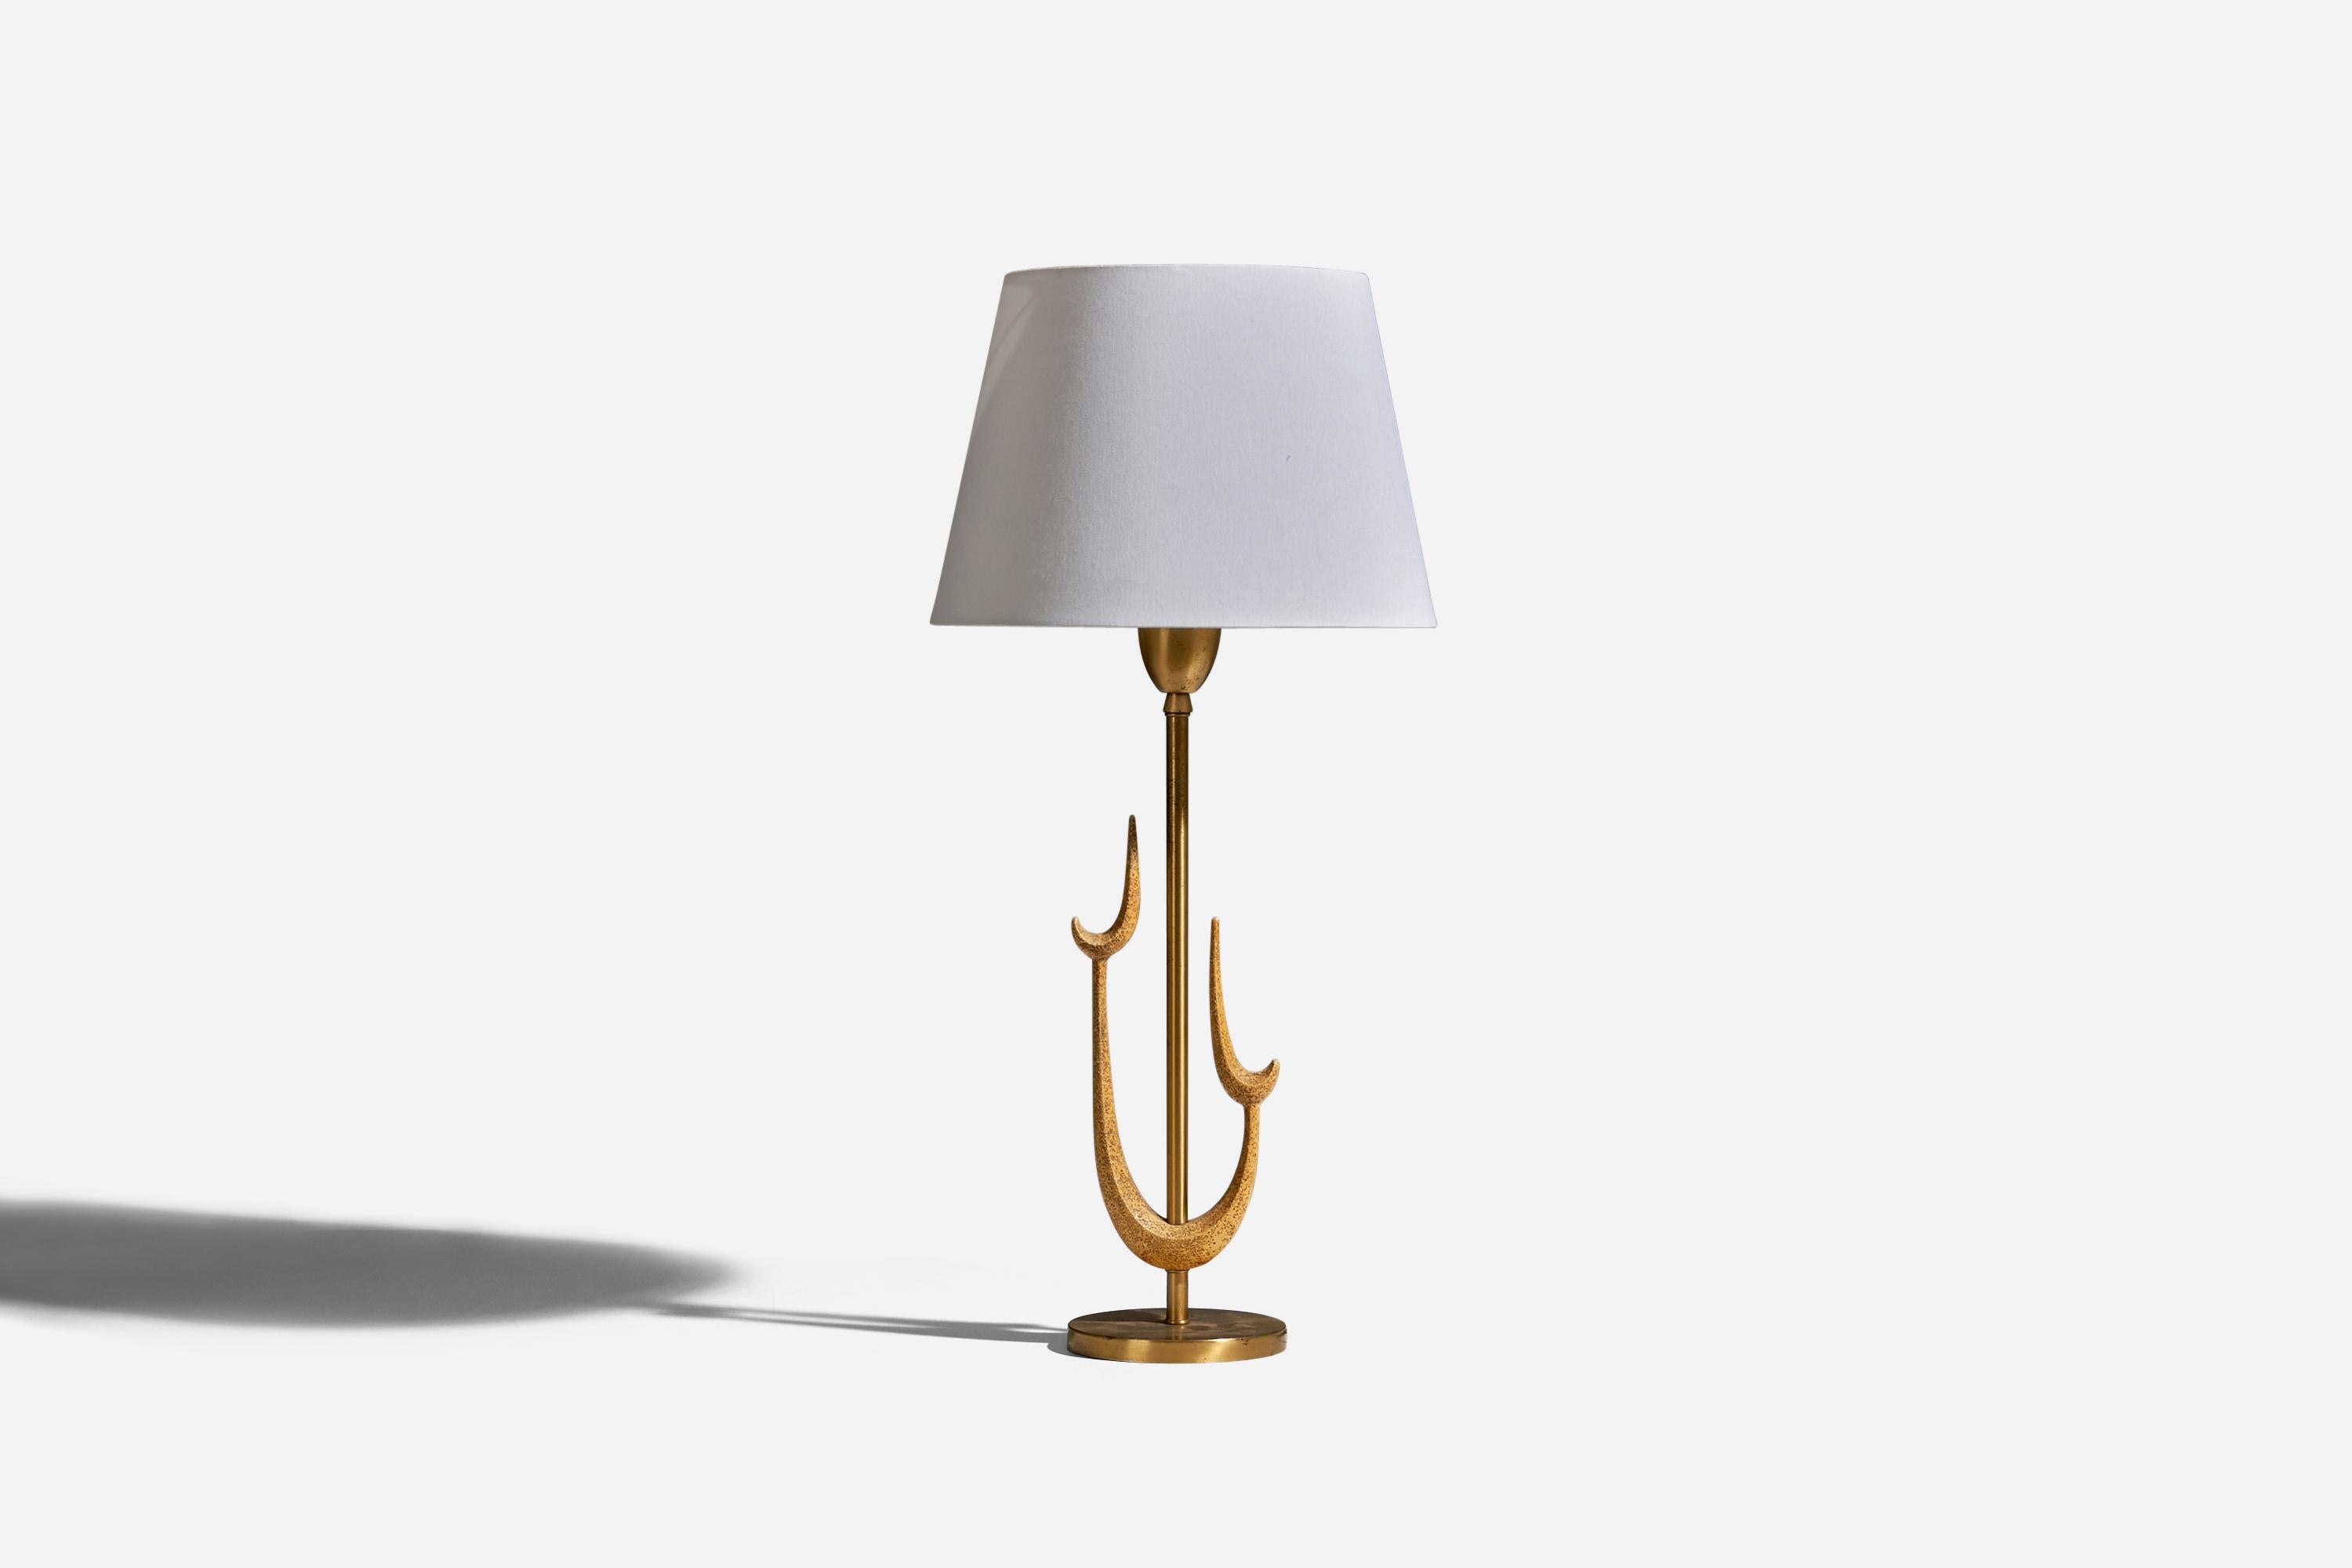 A brass table lamp designed and produced by an American Designer, USA, 1950s.

Sold without Lampshade
Dimensions of Lamp (inches) : 22 x 6.25 x 6.25 (Height x Width x Depth)
Dimensions of Lampshade (inches) : 10 x 14 x 10 (Top Diameter x Bottom